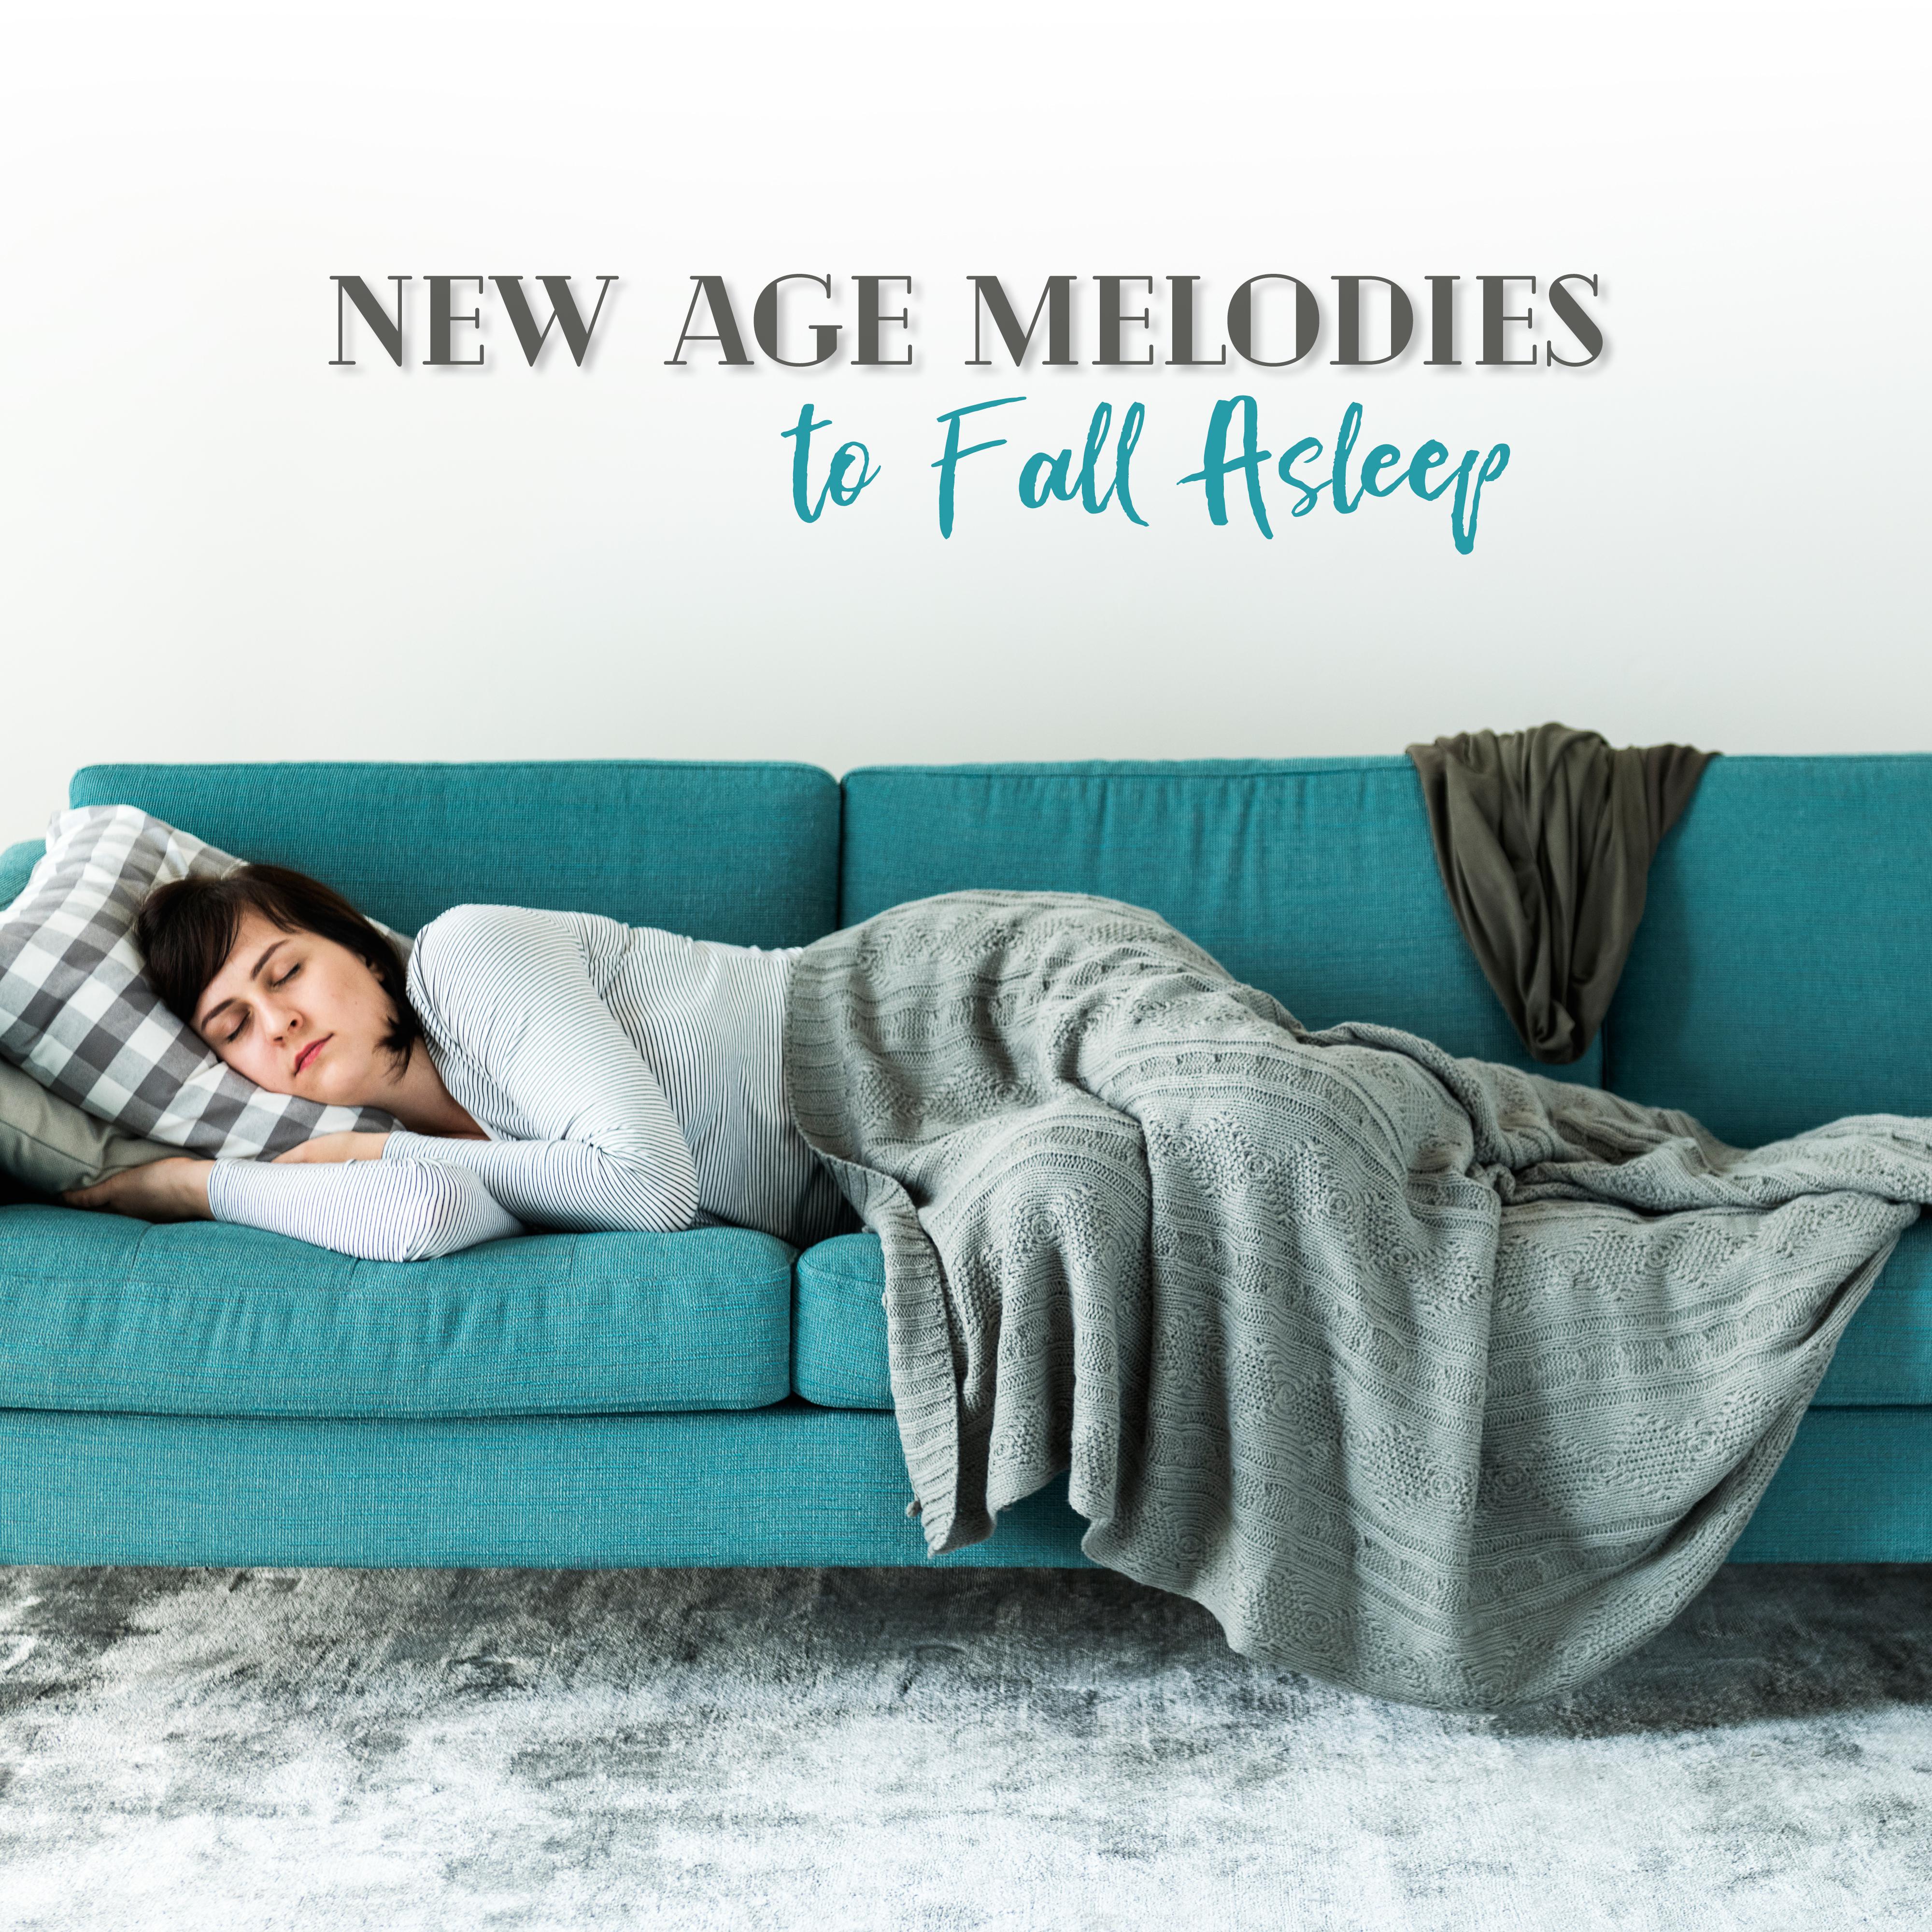 New Age Melodies to Fall Asleep